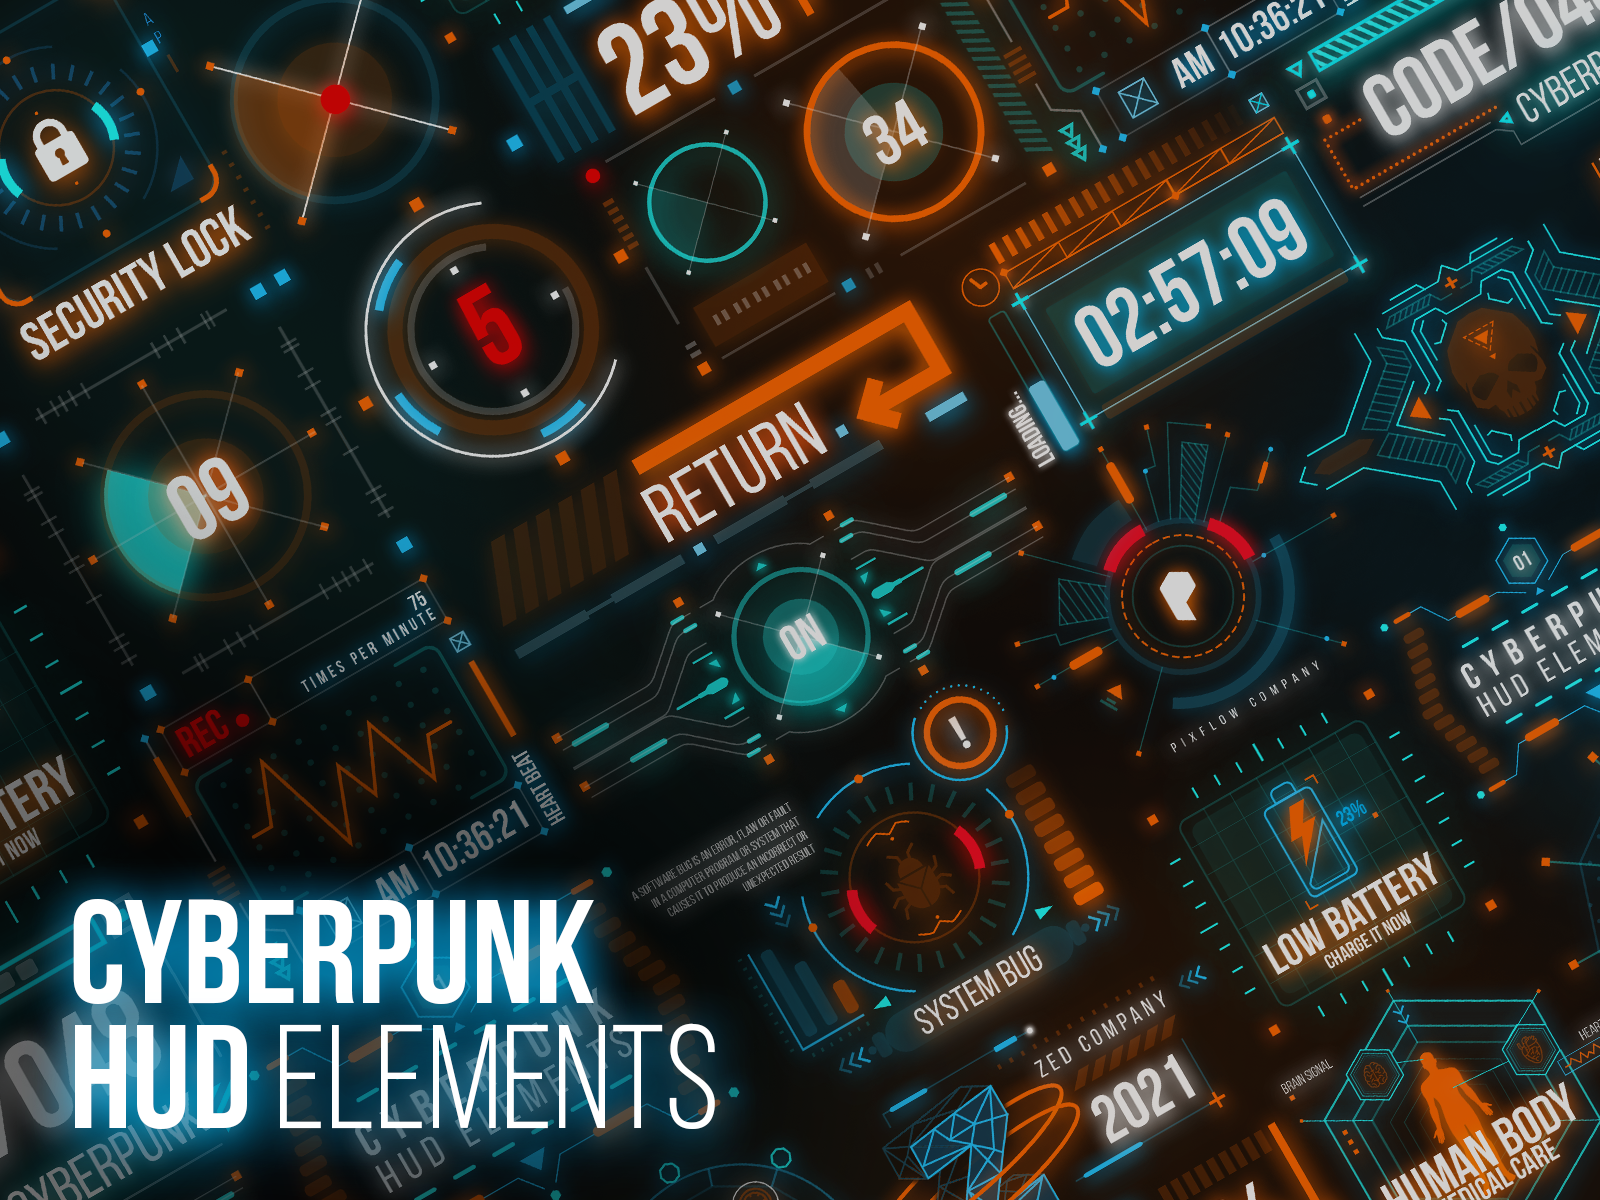 Cyberpunk hud elements for after effects torrent фото 7